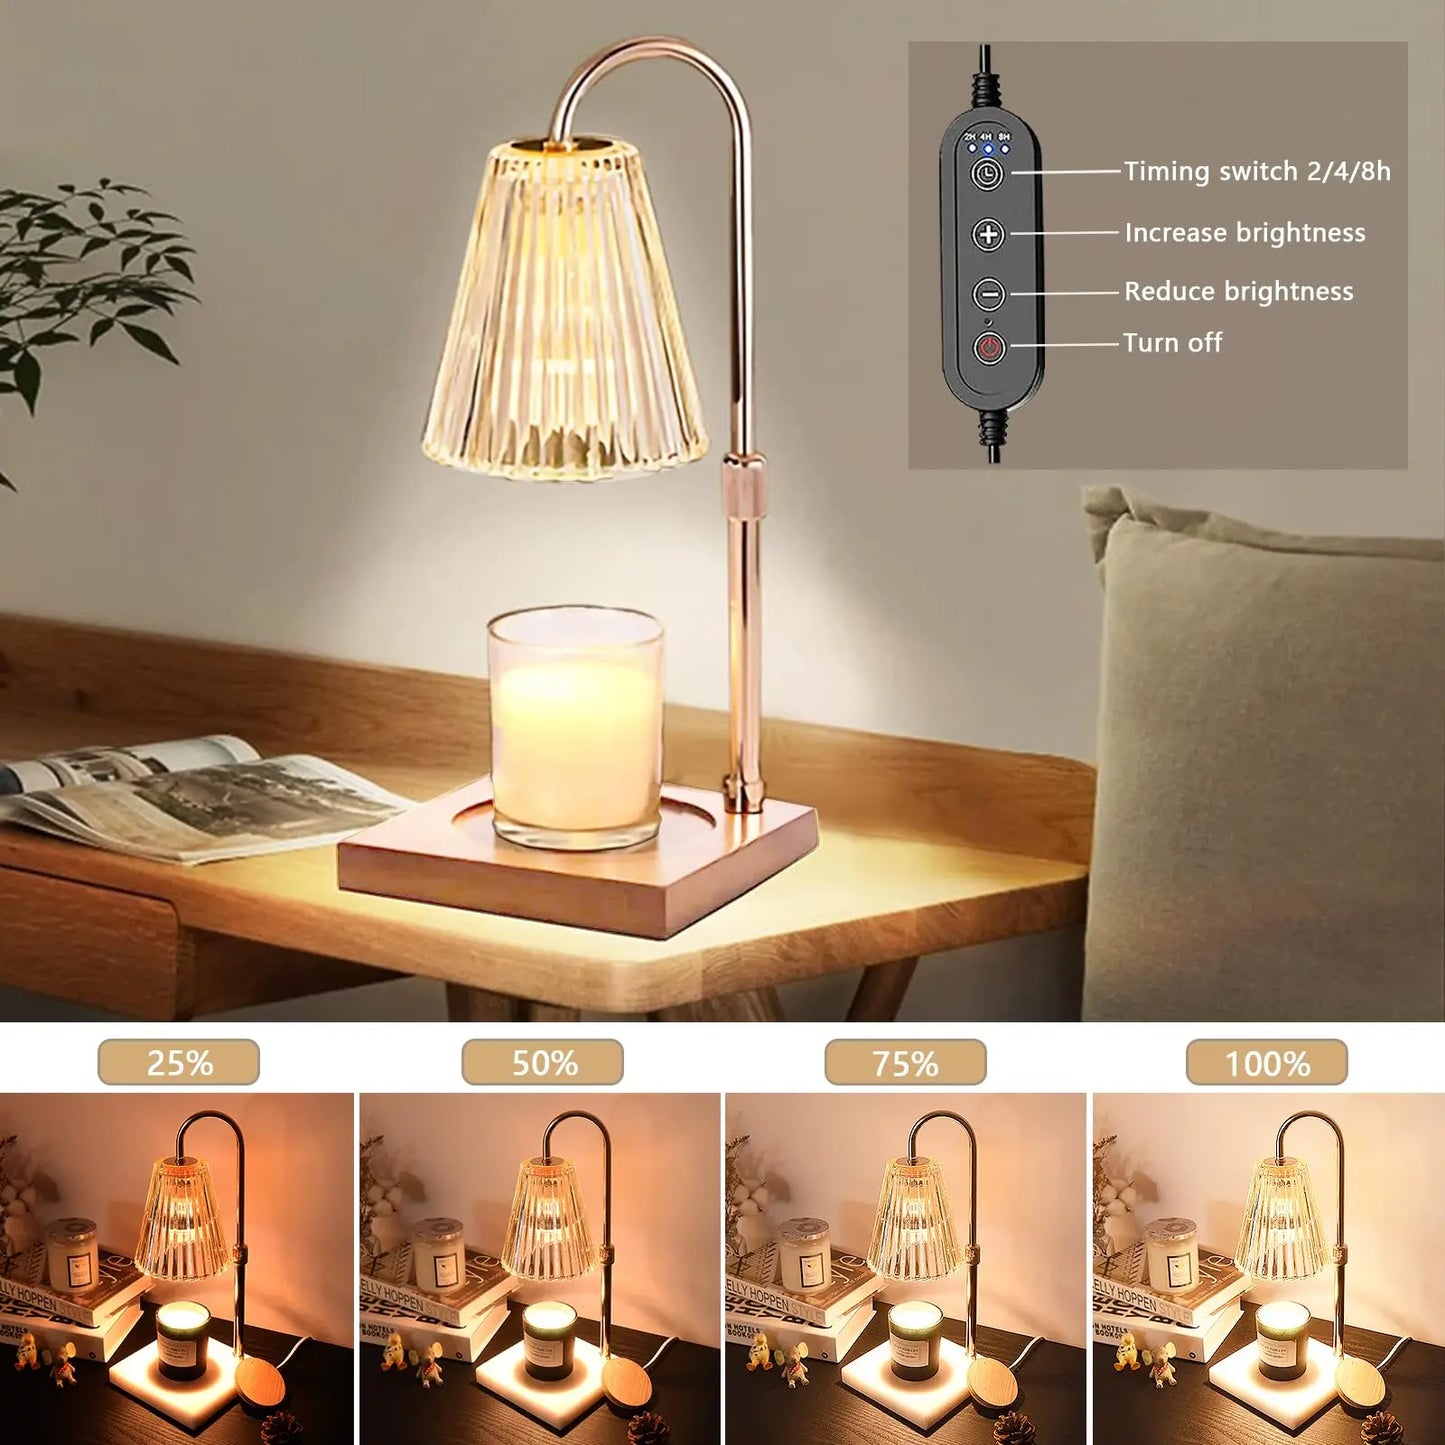 Desk lamp Electric Candle Warmer with Timer Dimmable Candle Lamp Compatible with Small and Large Candles  Aromatic Candle light